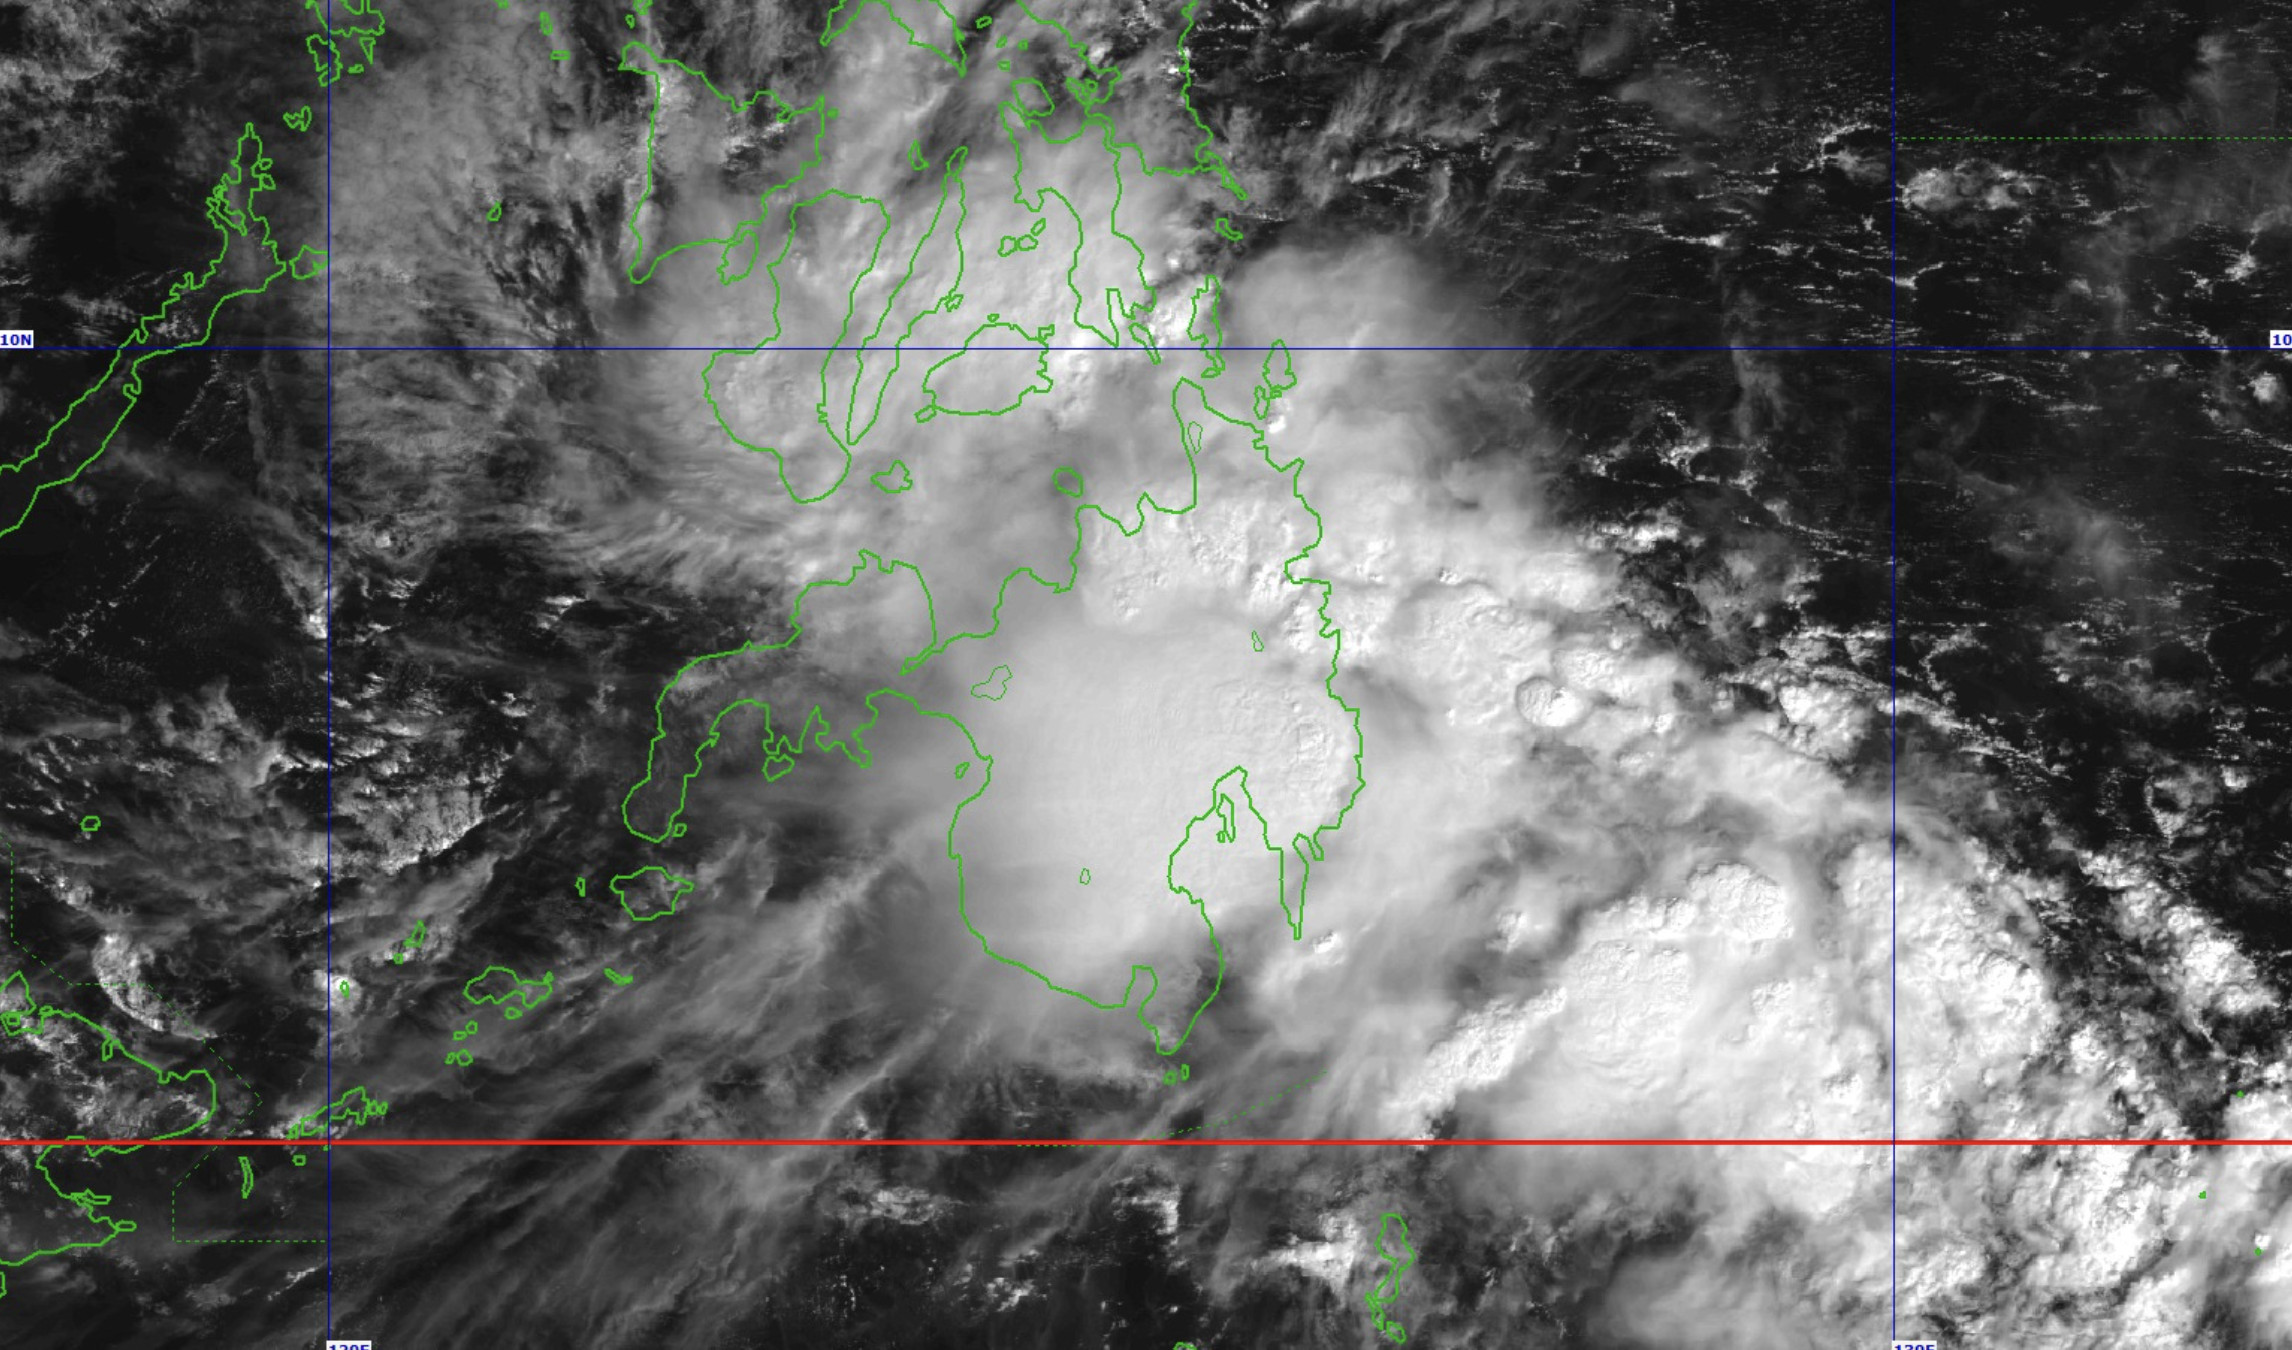 Tropical Storm Kabayan (international name: Jelawat) made landfall in Manay, Davao Oriental, the Philippine Atmospheric, Geophysical and Astronomical Services Administration (Pagasa) reported on Monday morning.